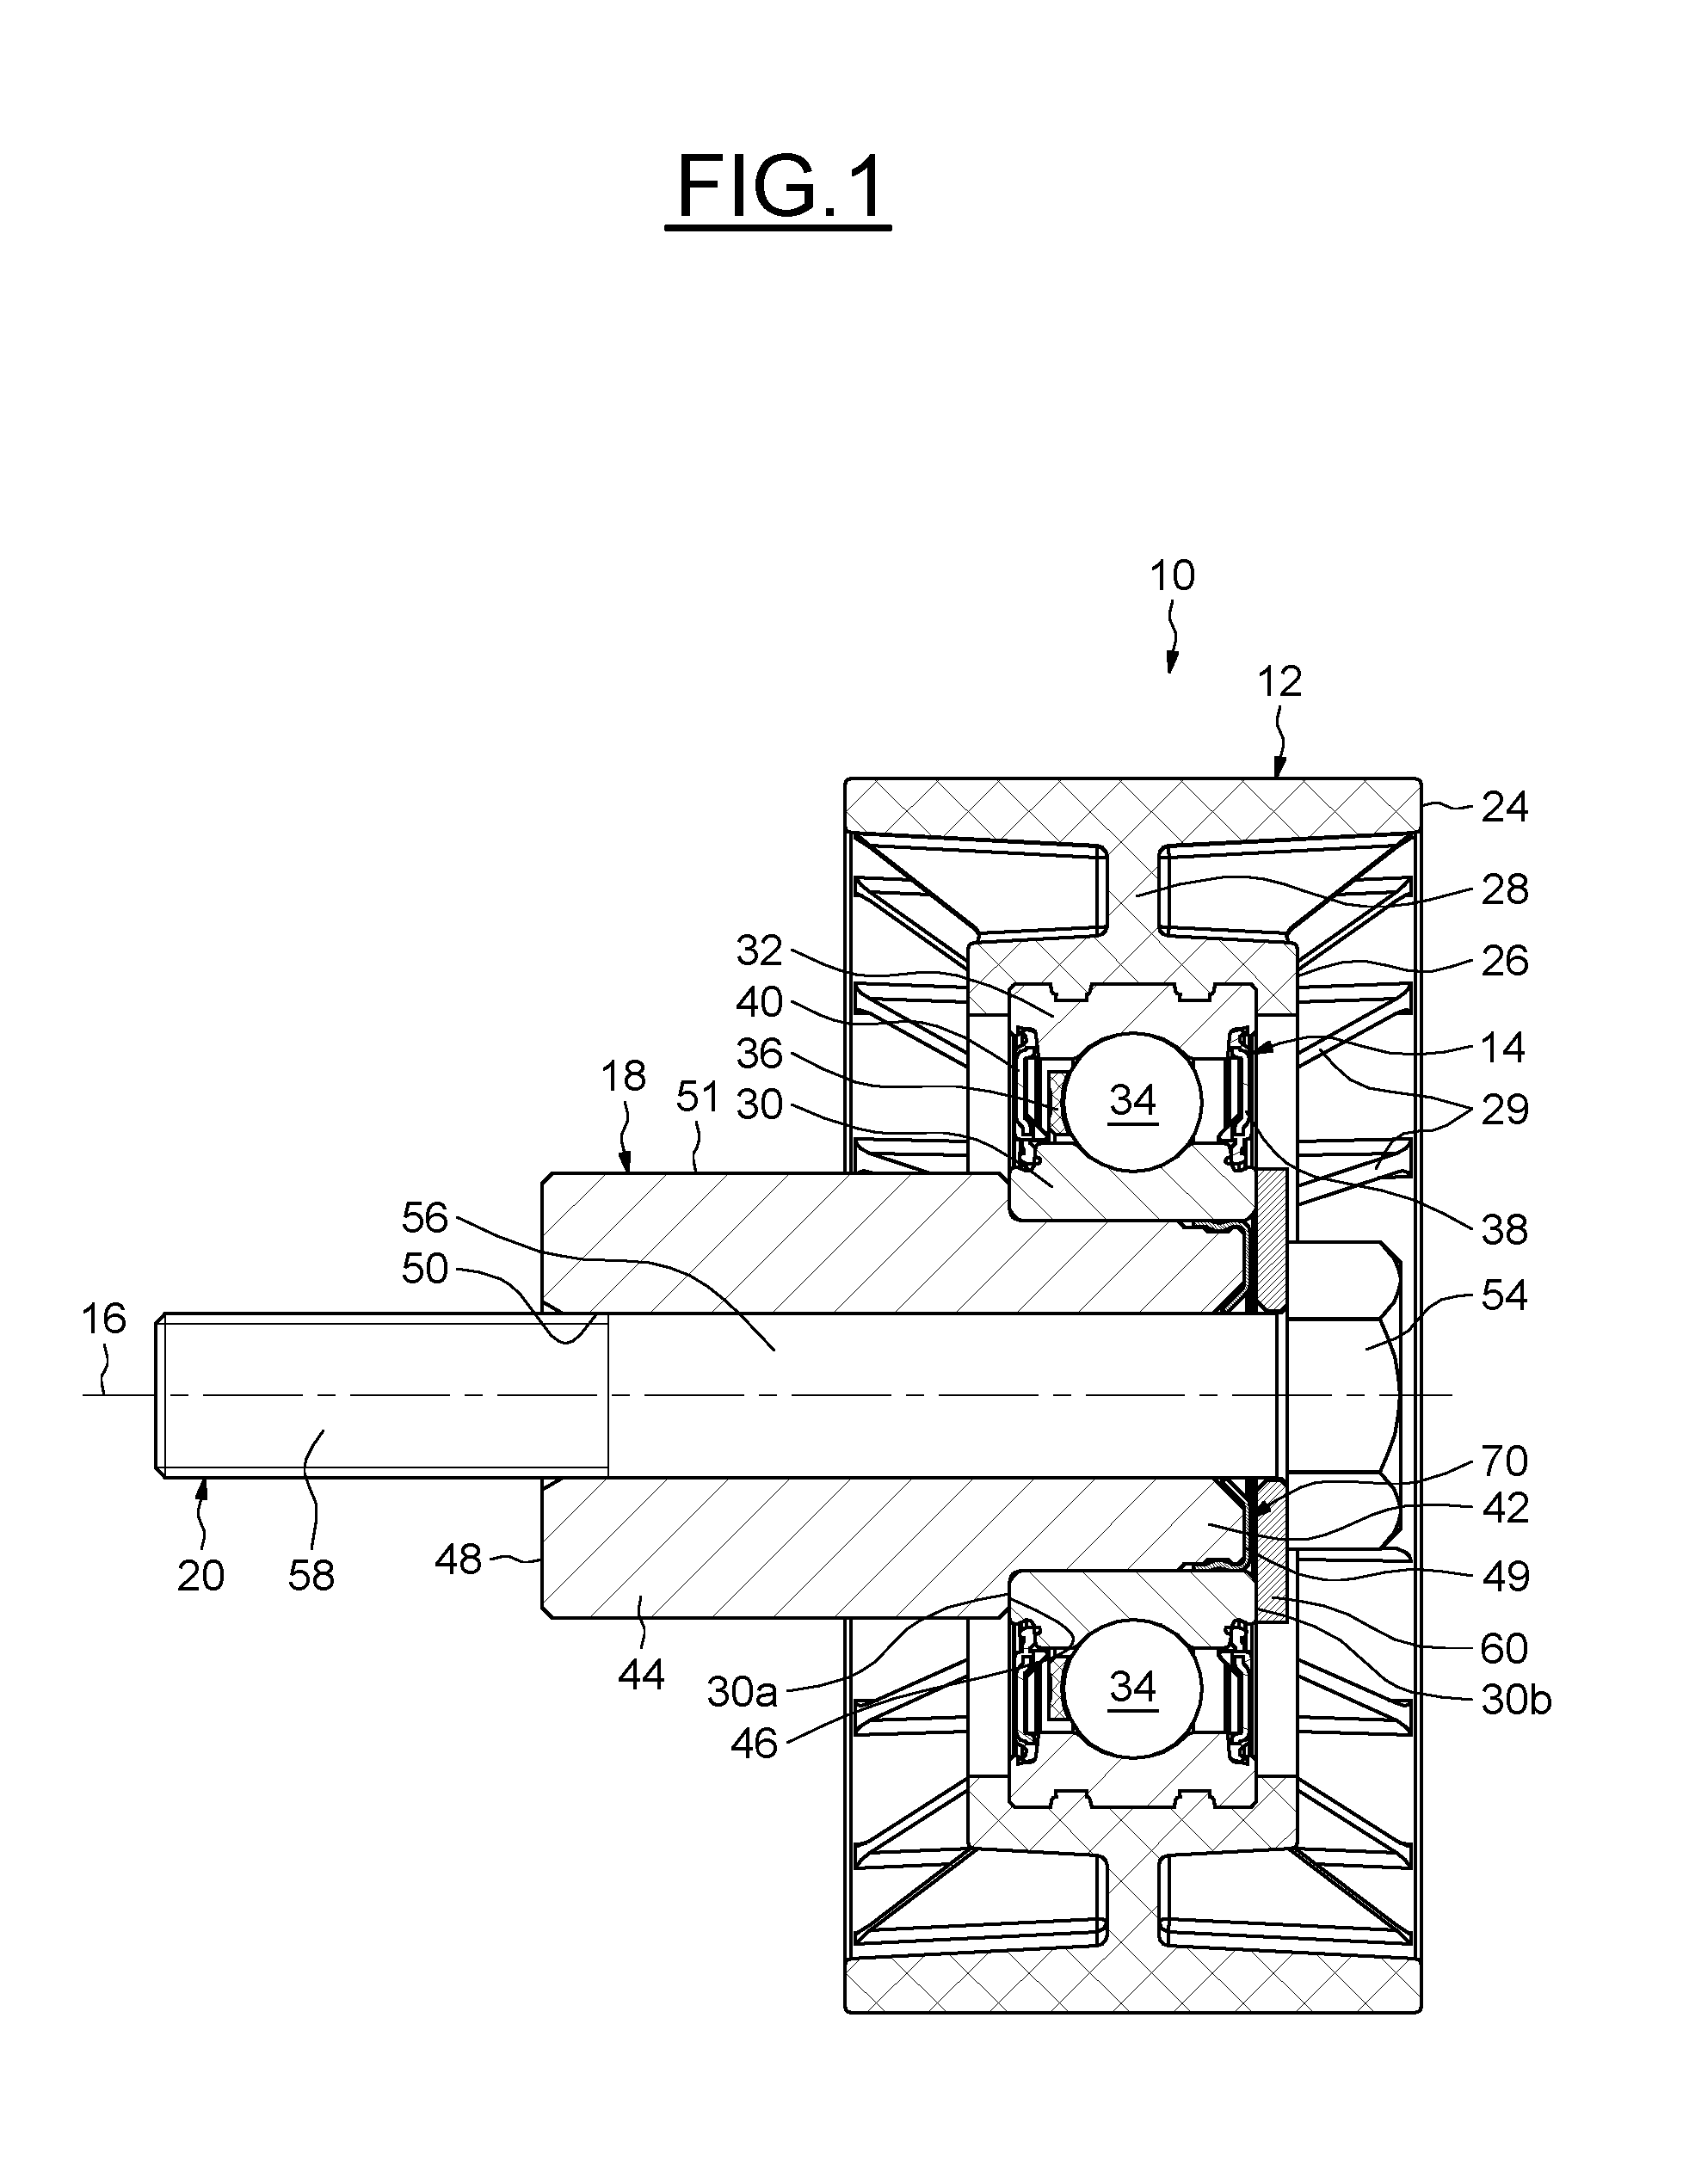 Pulley device for tensioner or idler